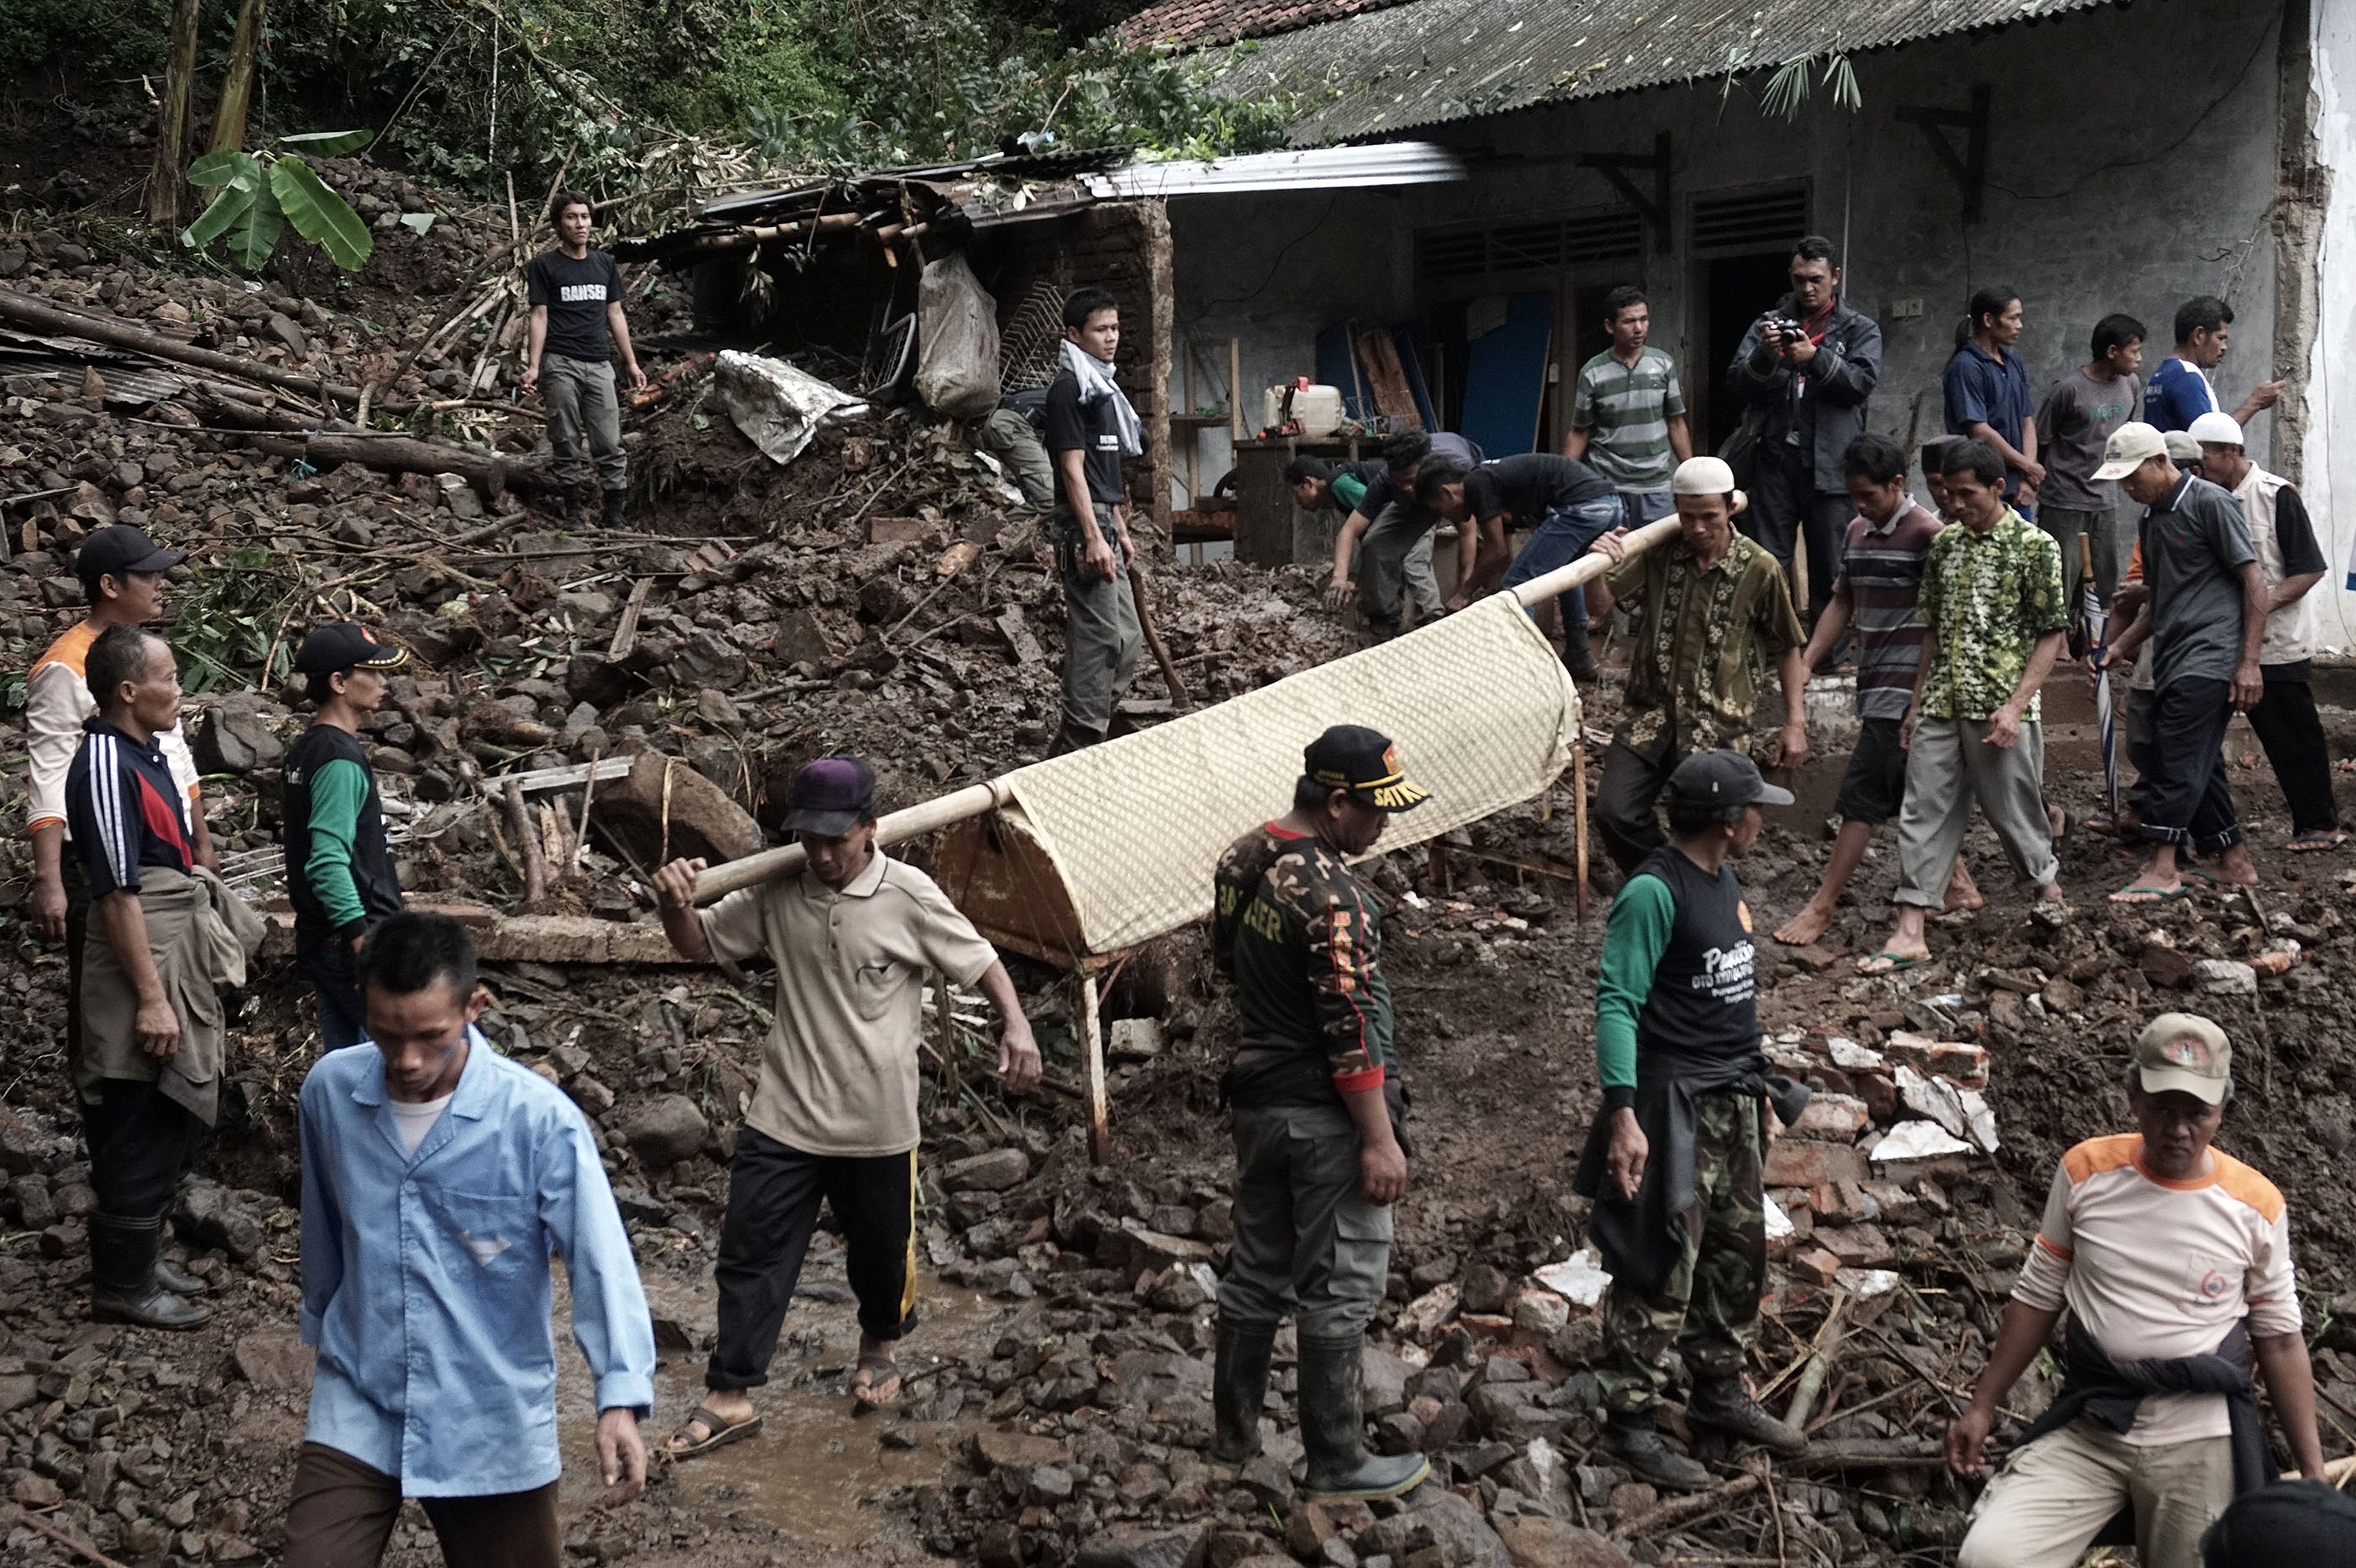 Indonesian villagers and search and rescue team members carry out the body of a landslide victim at Gumelem Kulon village in Banjarnegara on June 19, 2016.   Flash flooding and landslides in Indonesia have killed 24 and left more than two dozen missing, an official said on June 19, with mud avalanches burying people inside their homes. / AFP PHOTO / ROHMAT SYARIF